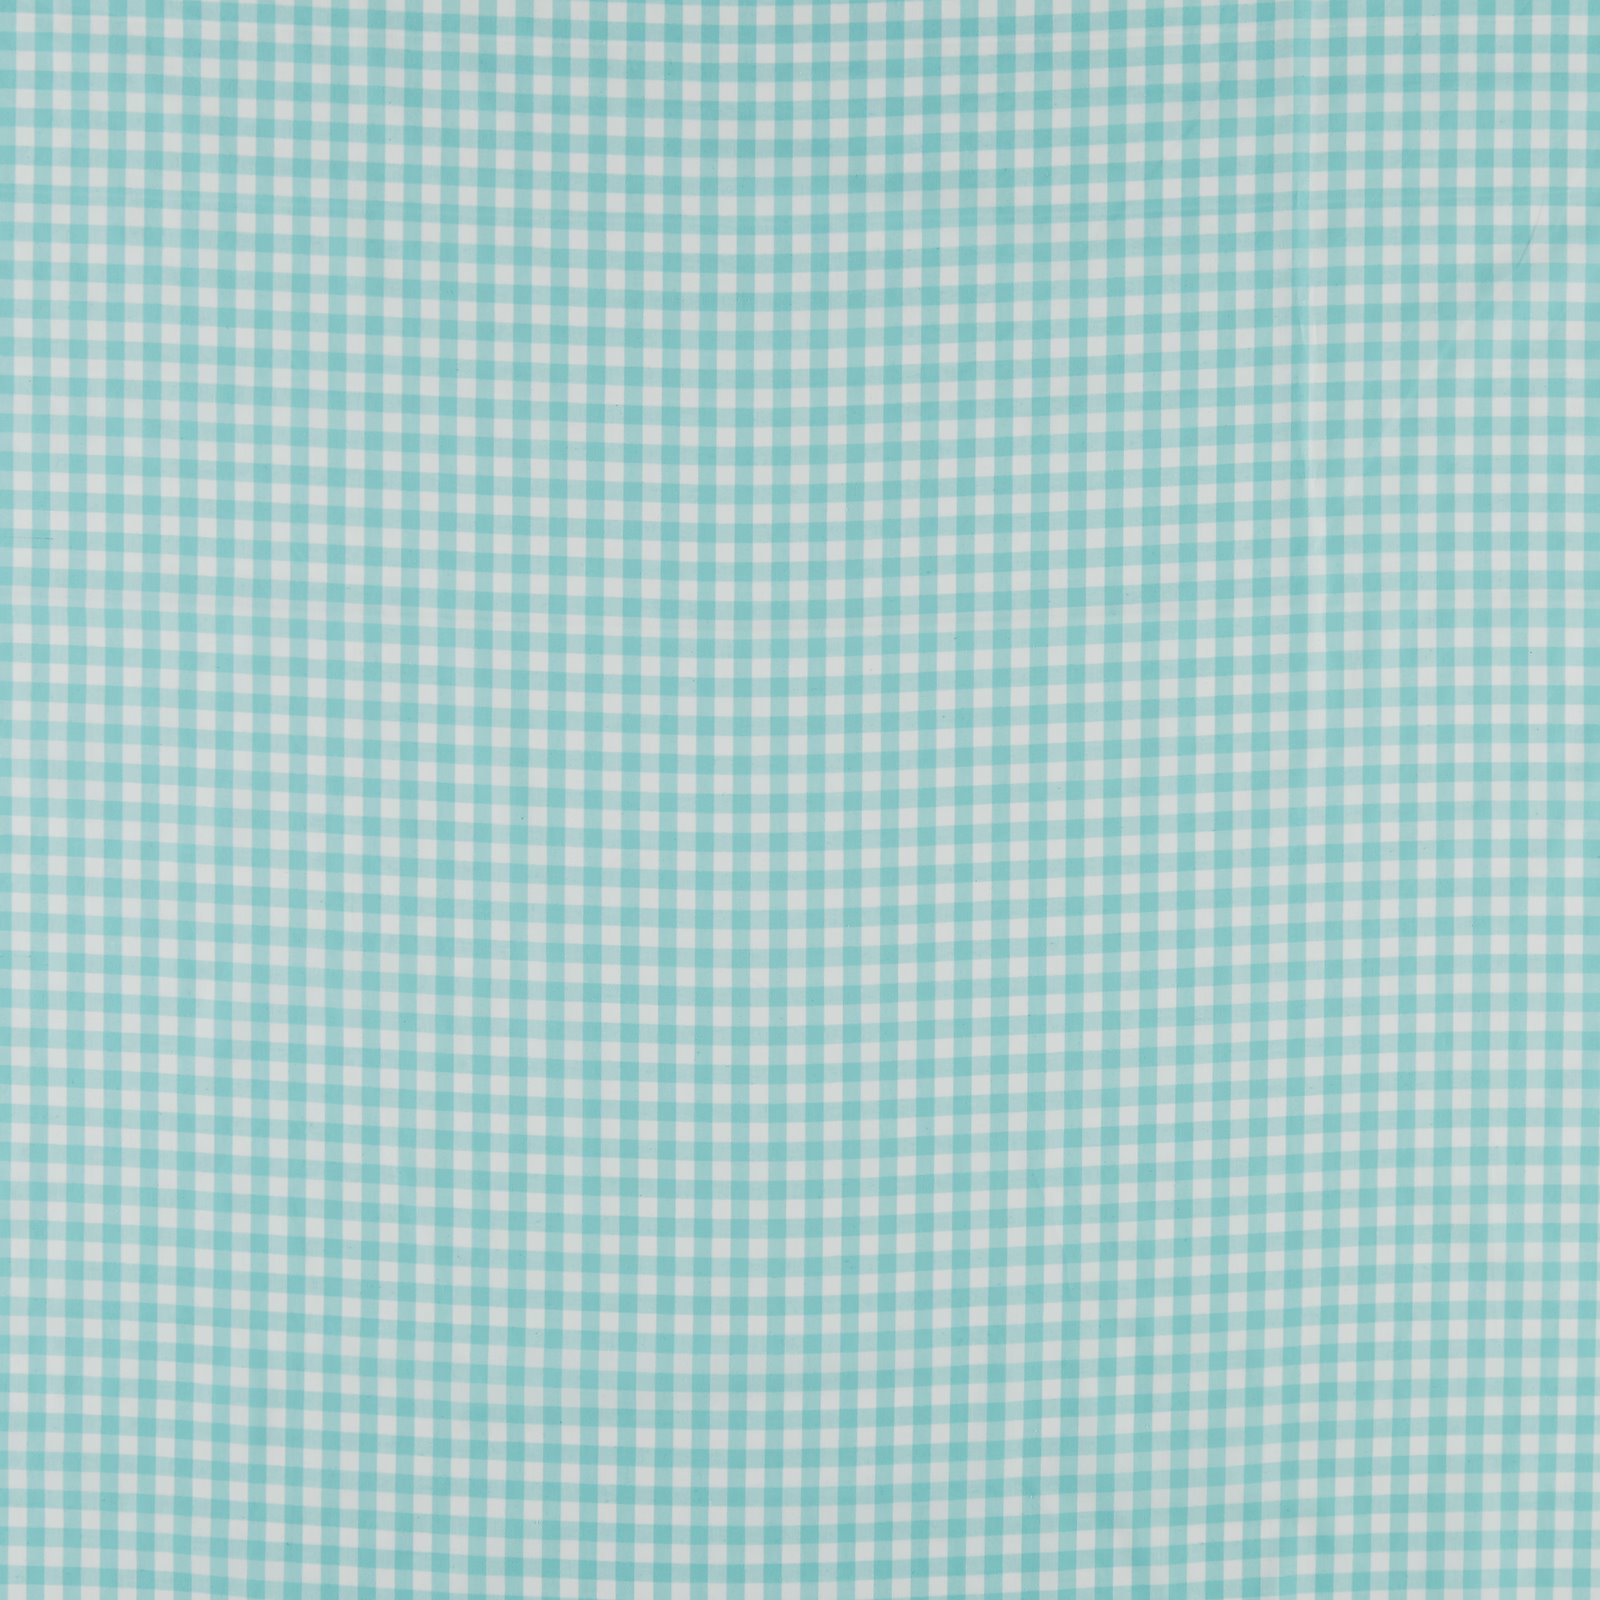 Cotton YD light turquoise/white check 780903_pack_sp